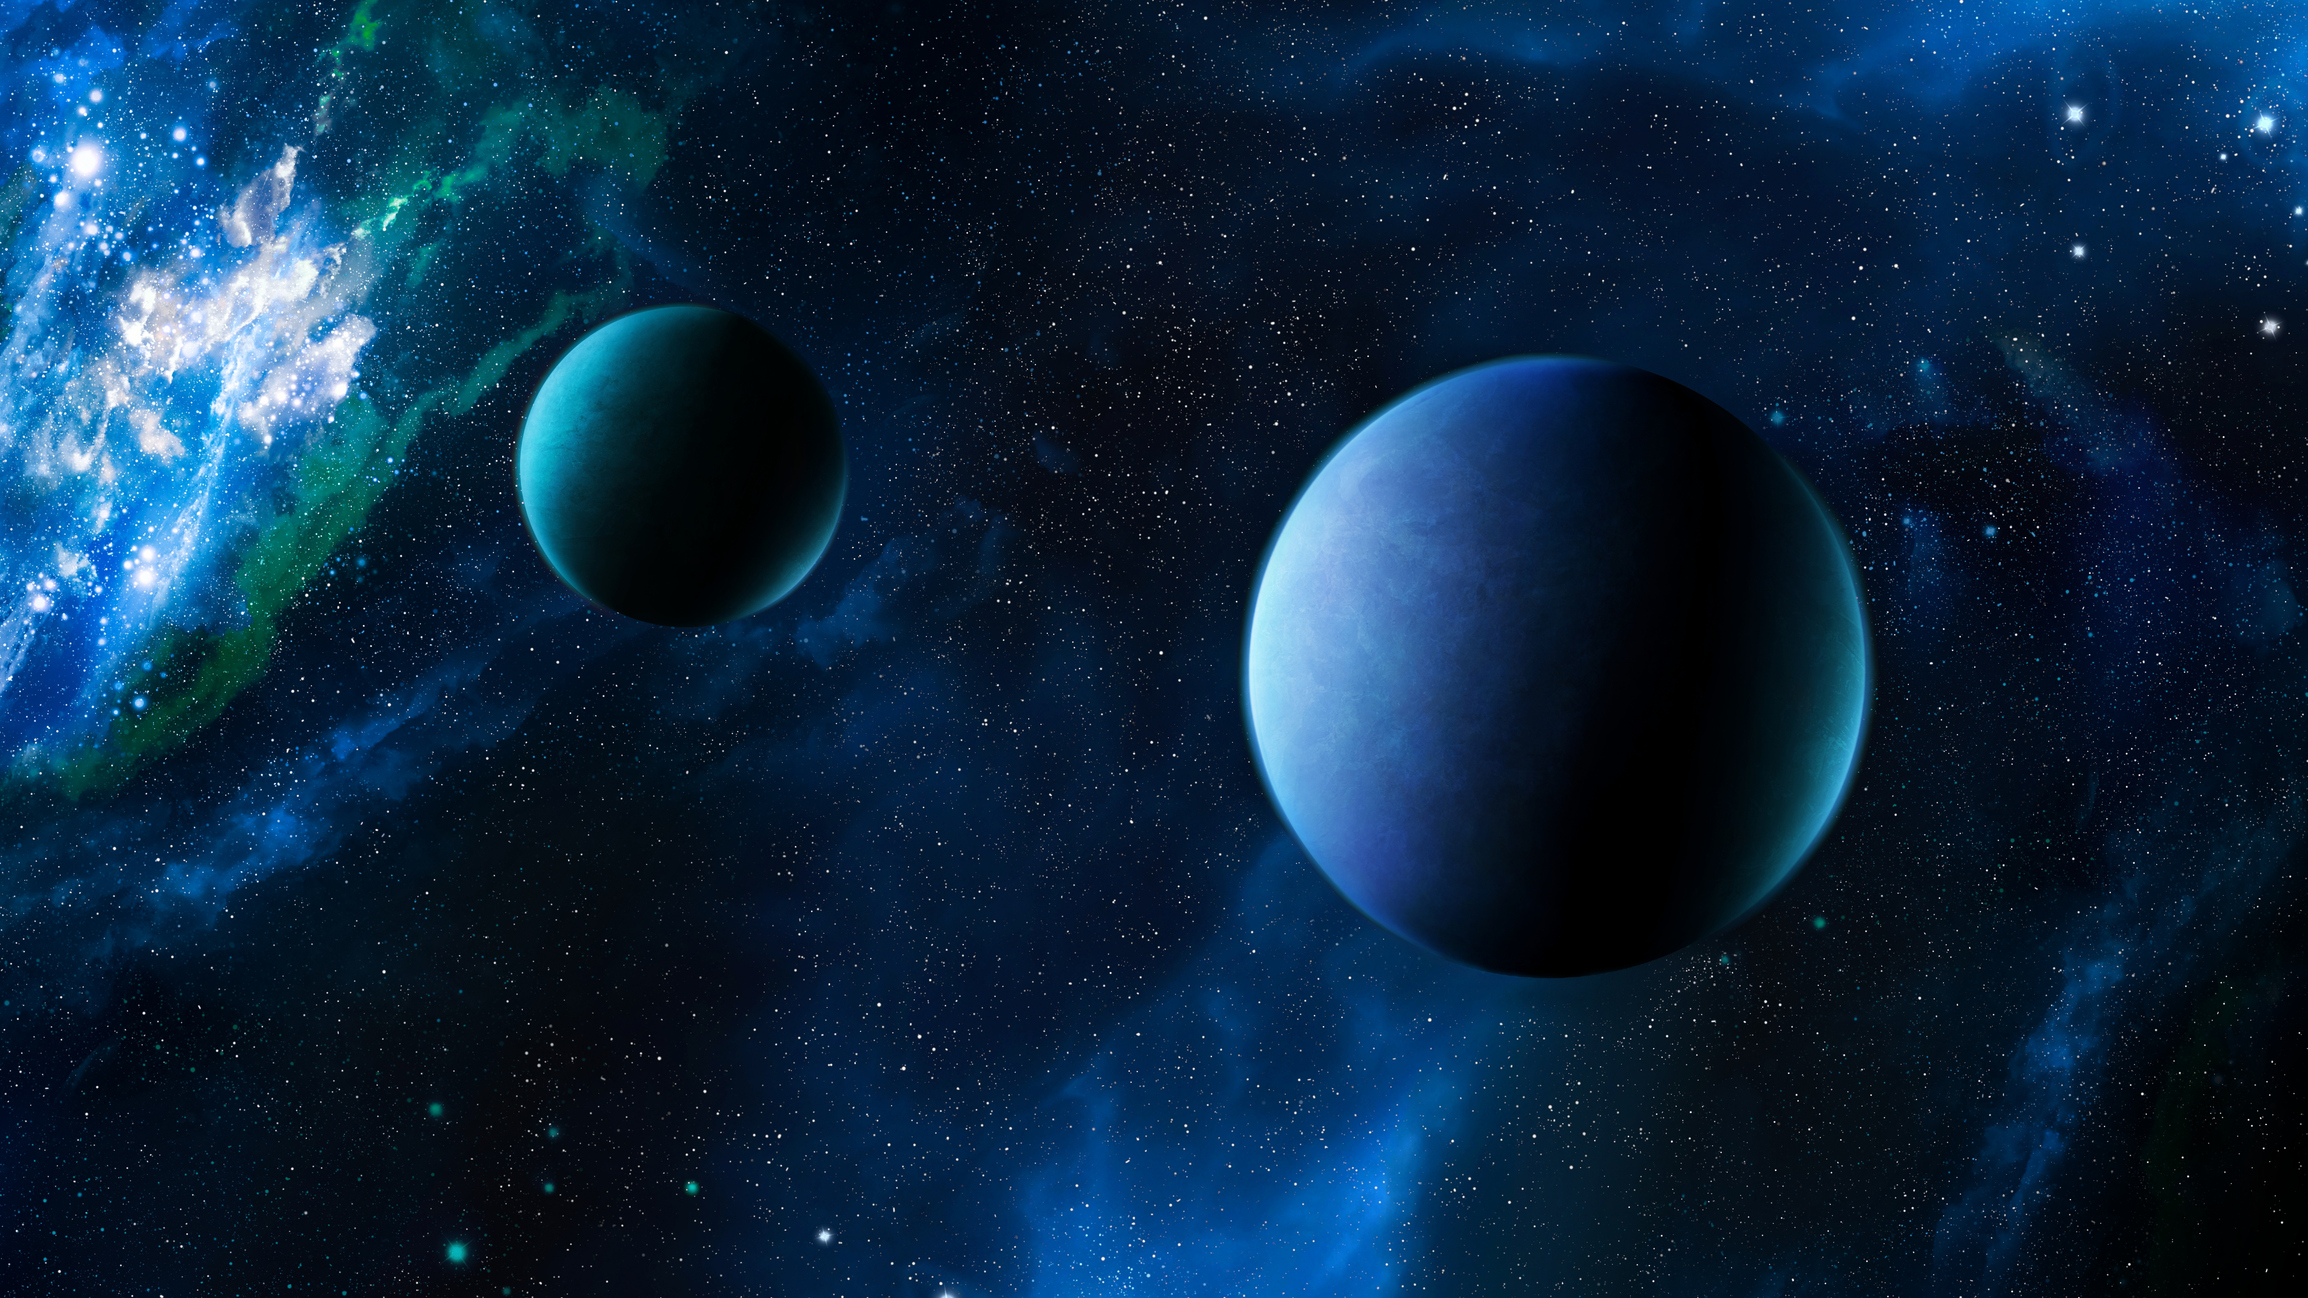 graphic illustration of two exoplanets against a background of stars and a nebula to the upper left corner.